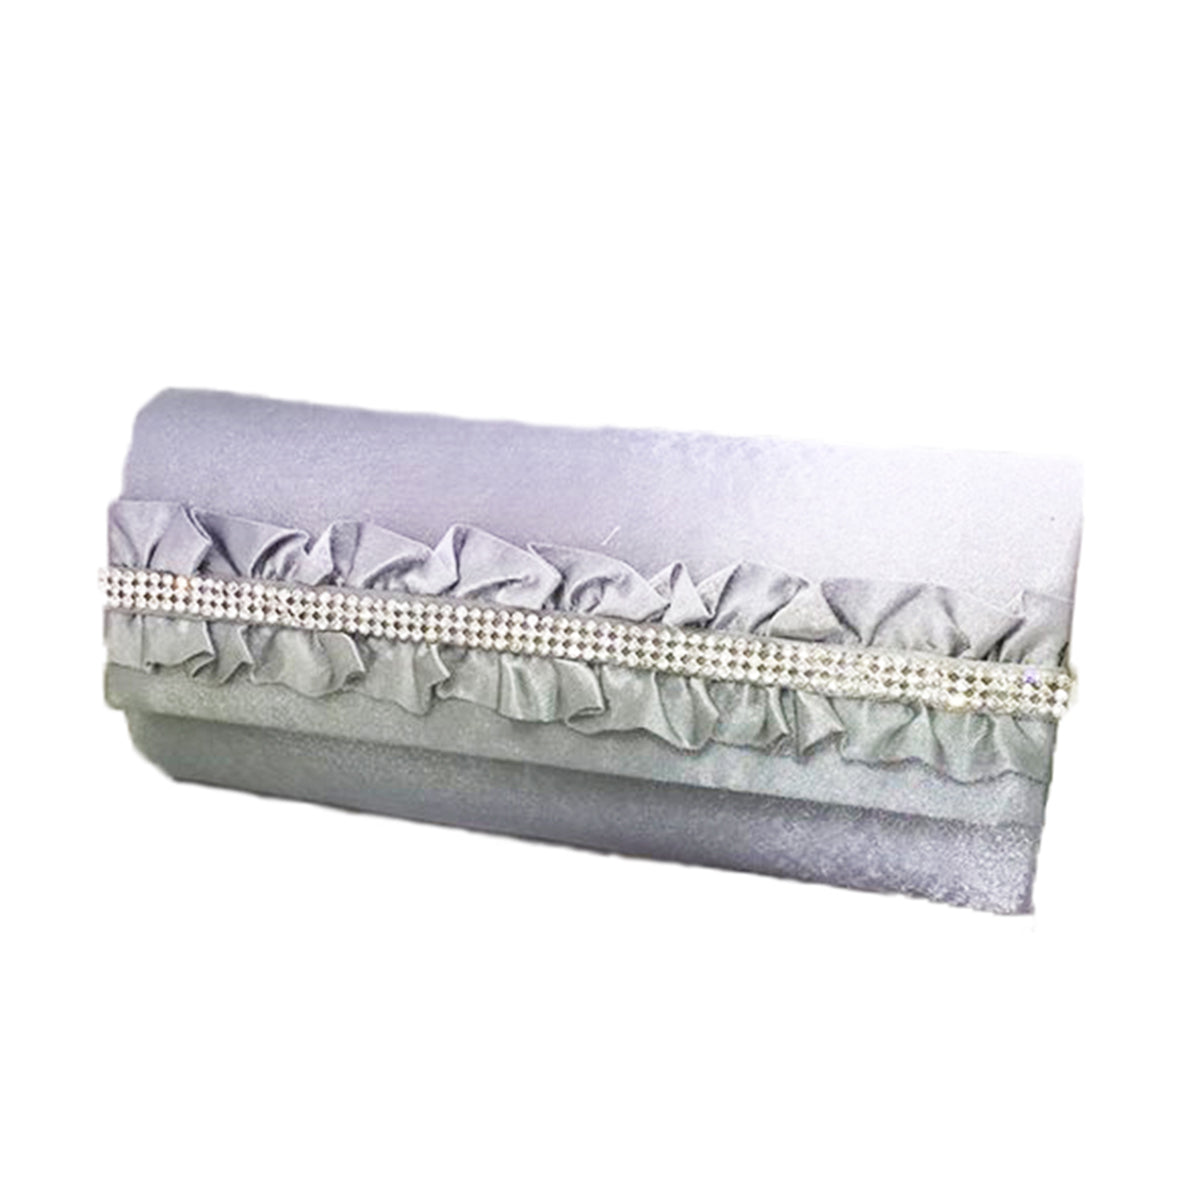 Silver satin evening clutch bag with frilled front and diamanté strip